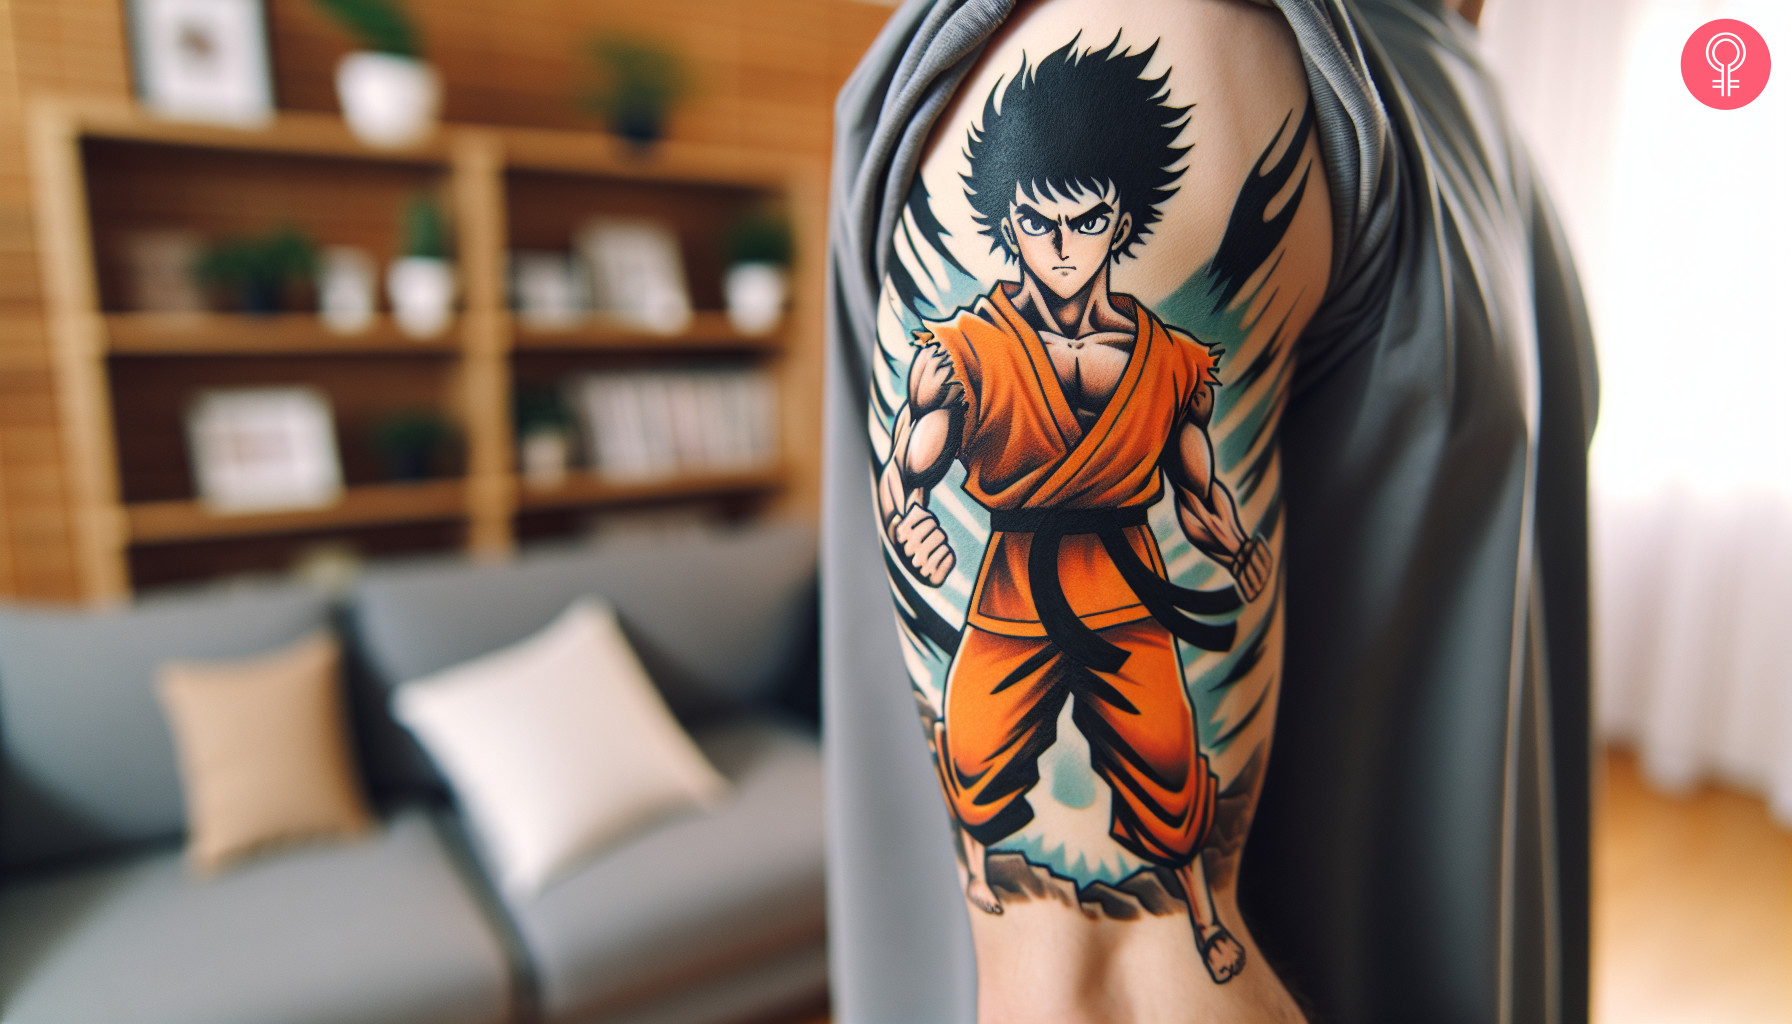 Colorful Goku tattoo on the arm of a man